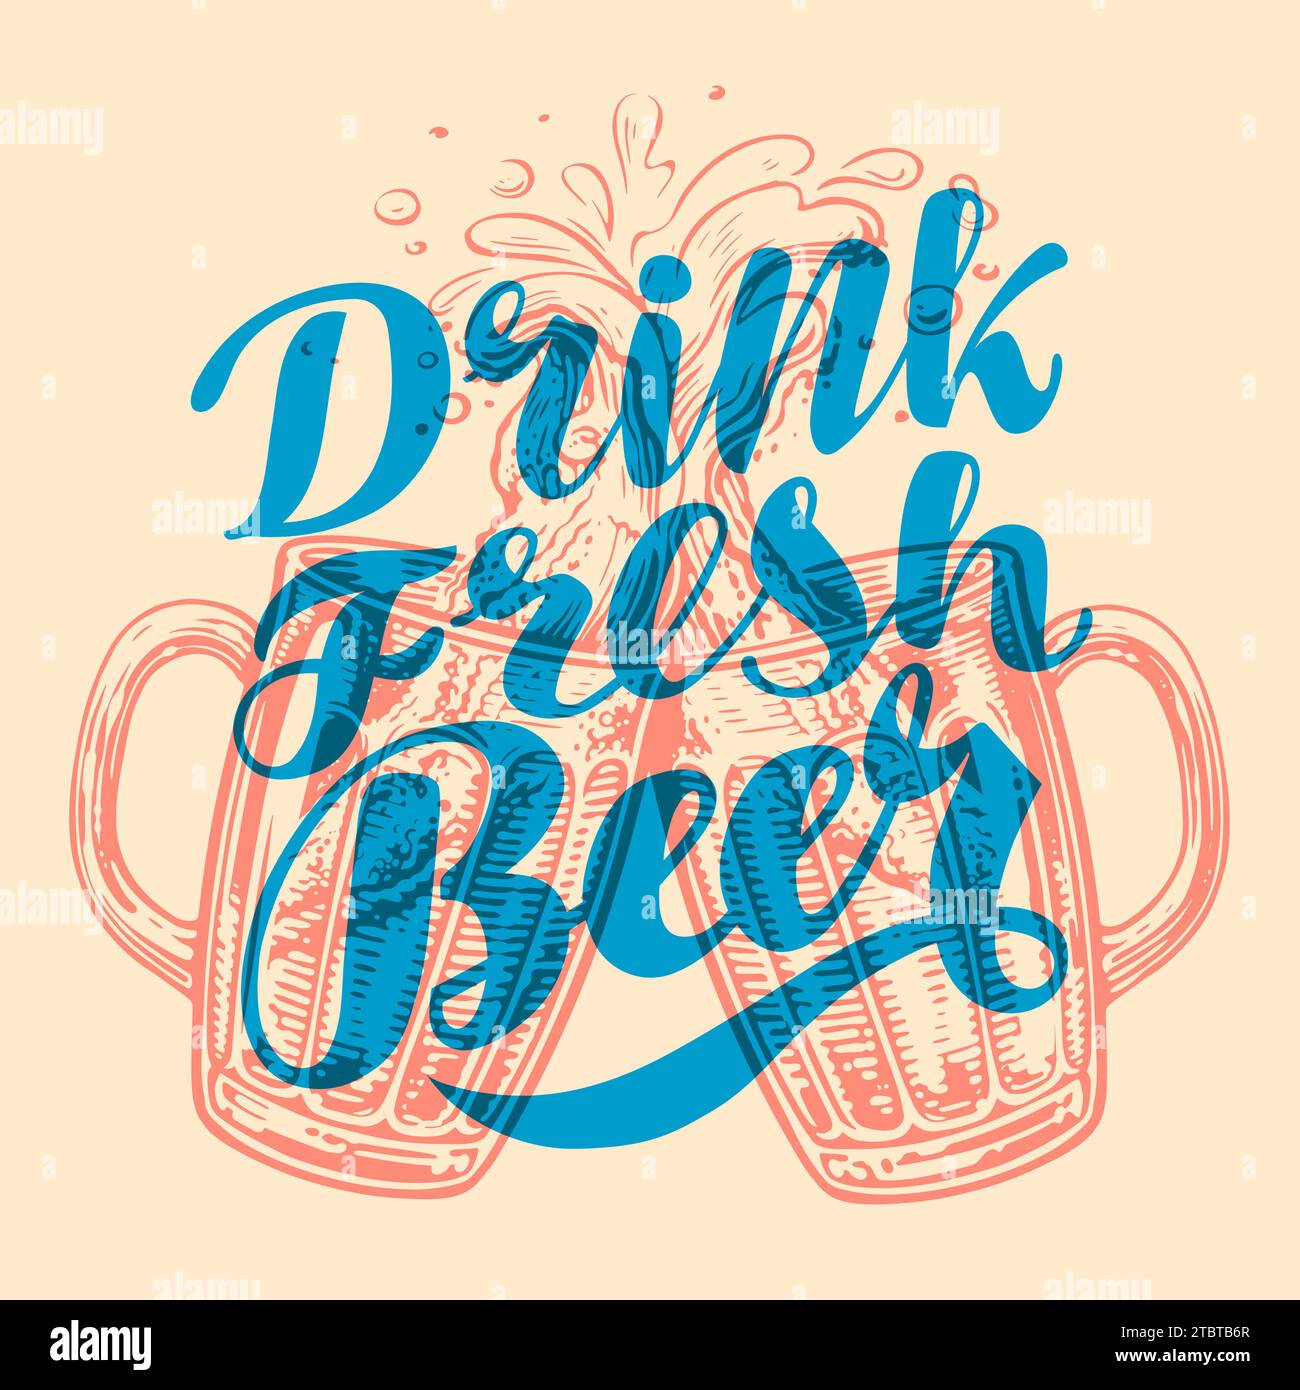 Drink fresh beer. Vintage vector illustration with calligraphy lettering for poster, party or festival invitation Stock Vector